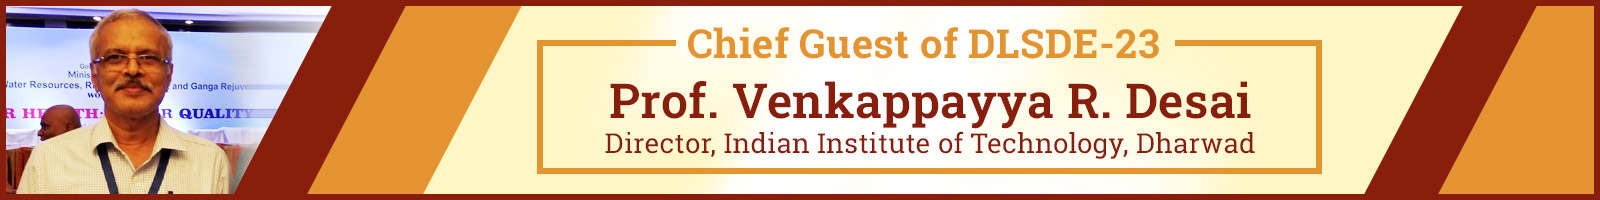 chief-guest